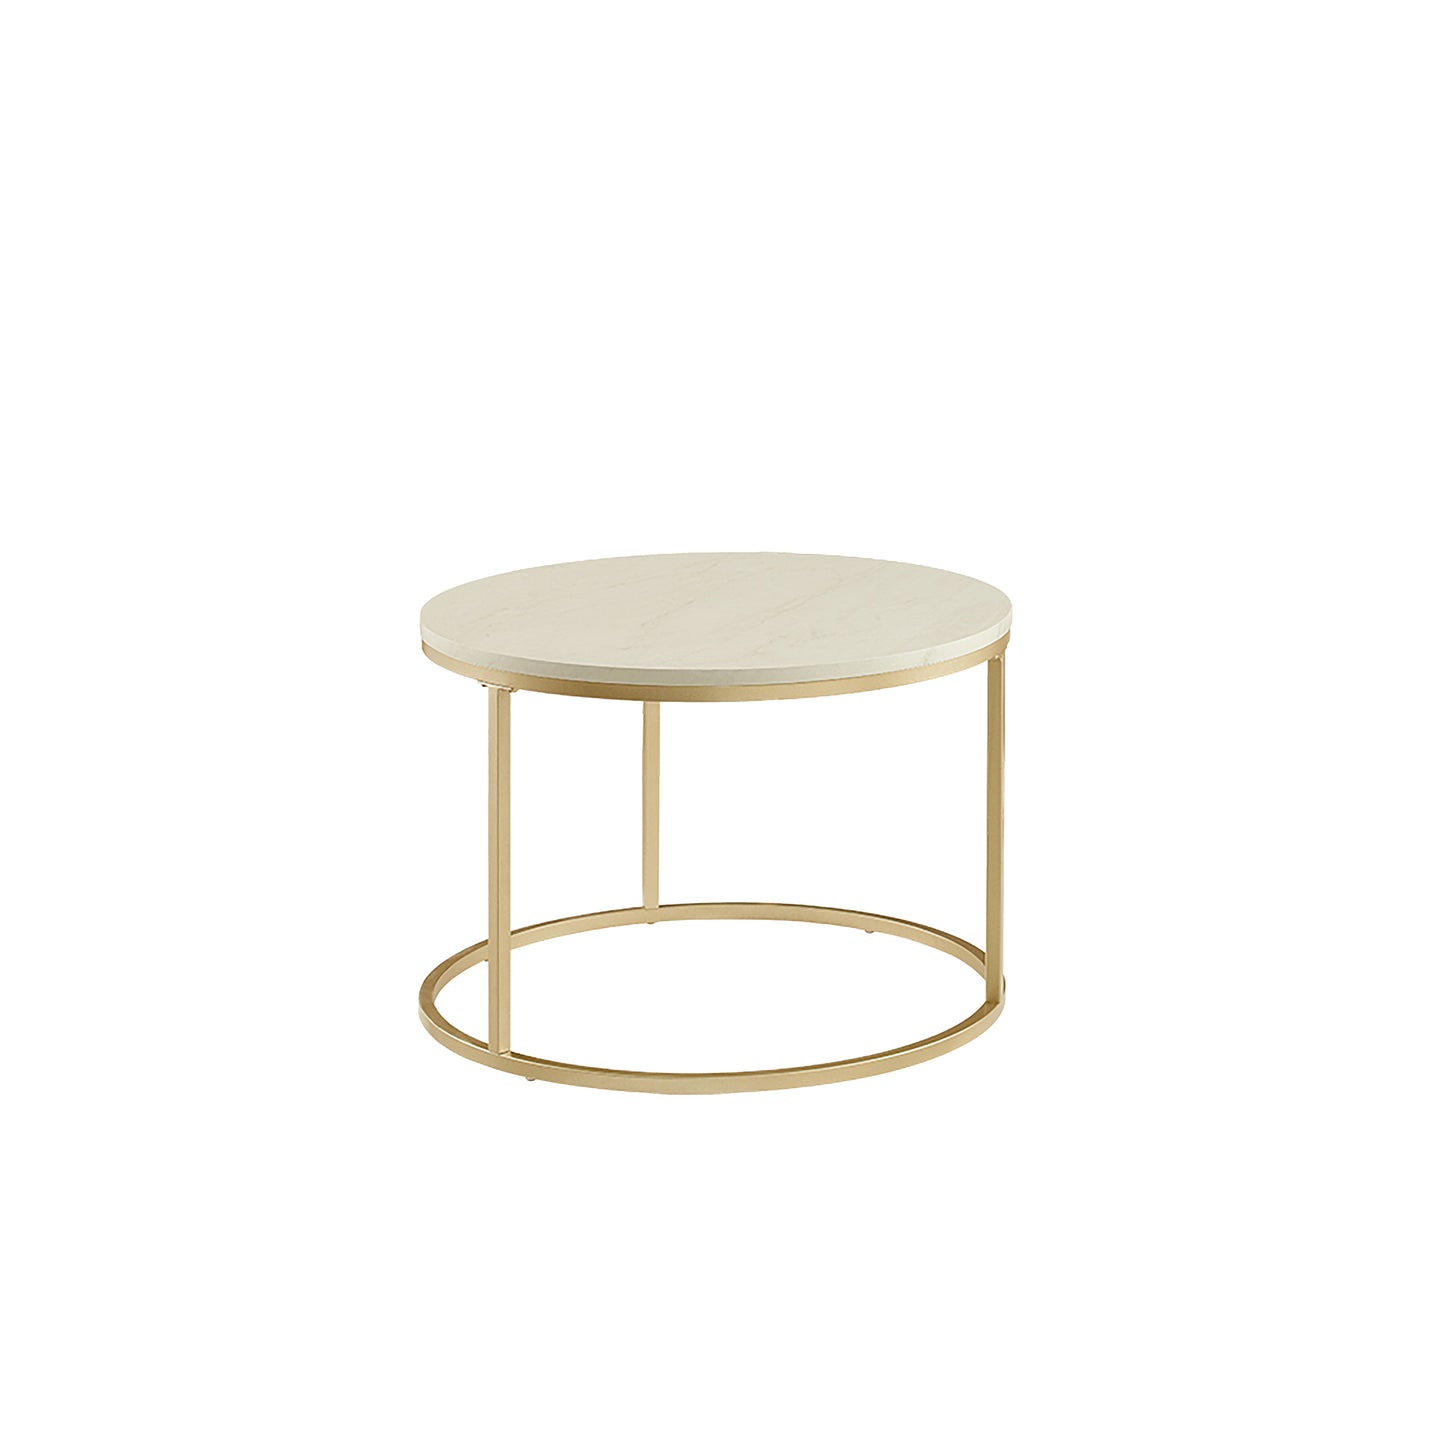 Criterion Nested Set Coffee Tables 760mm Champagne Gold Metal Frame White Marble Look Top